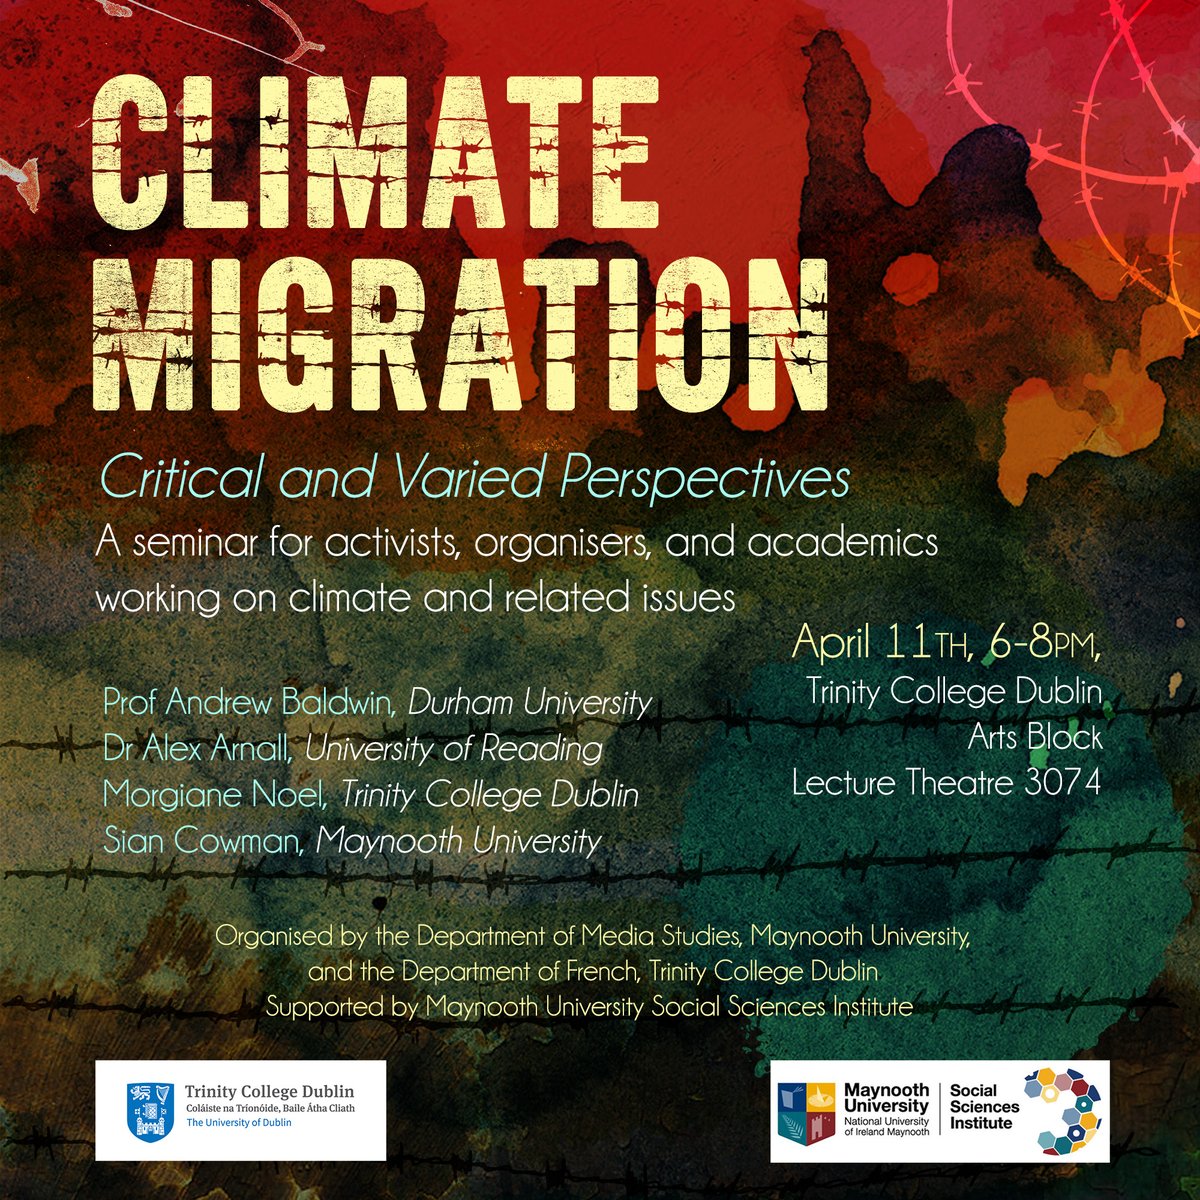 Seminar on climate migration migration, critical and varied perspectives. Tomorrow, Thursday 11 April, 6-8pm.